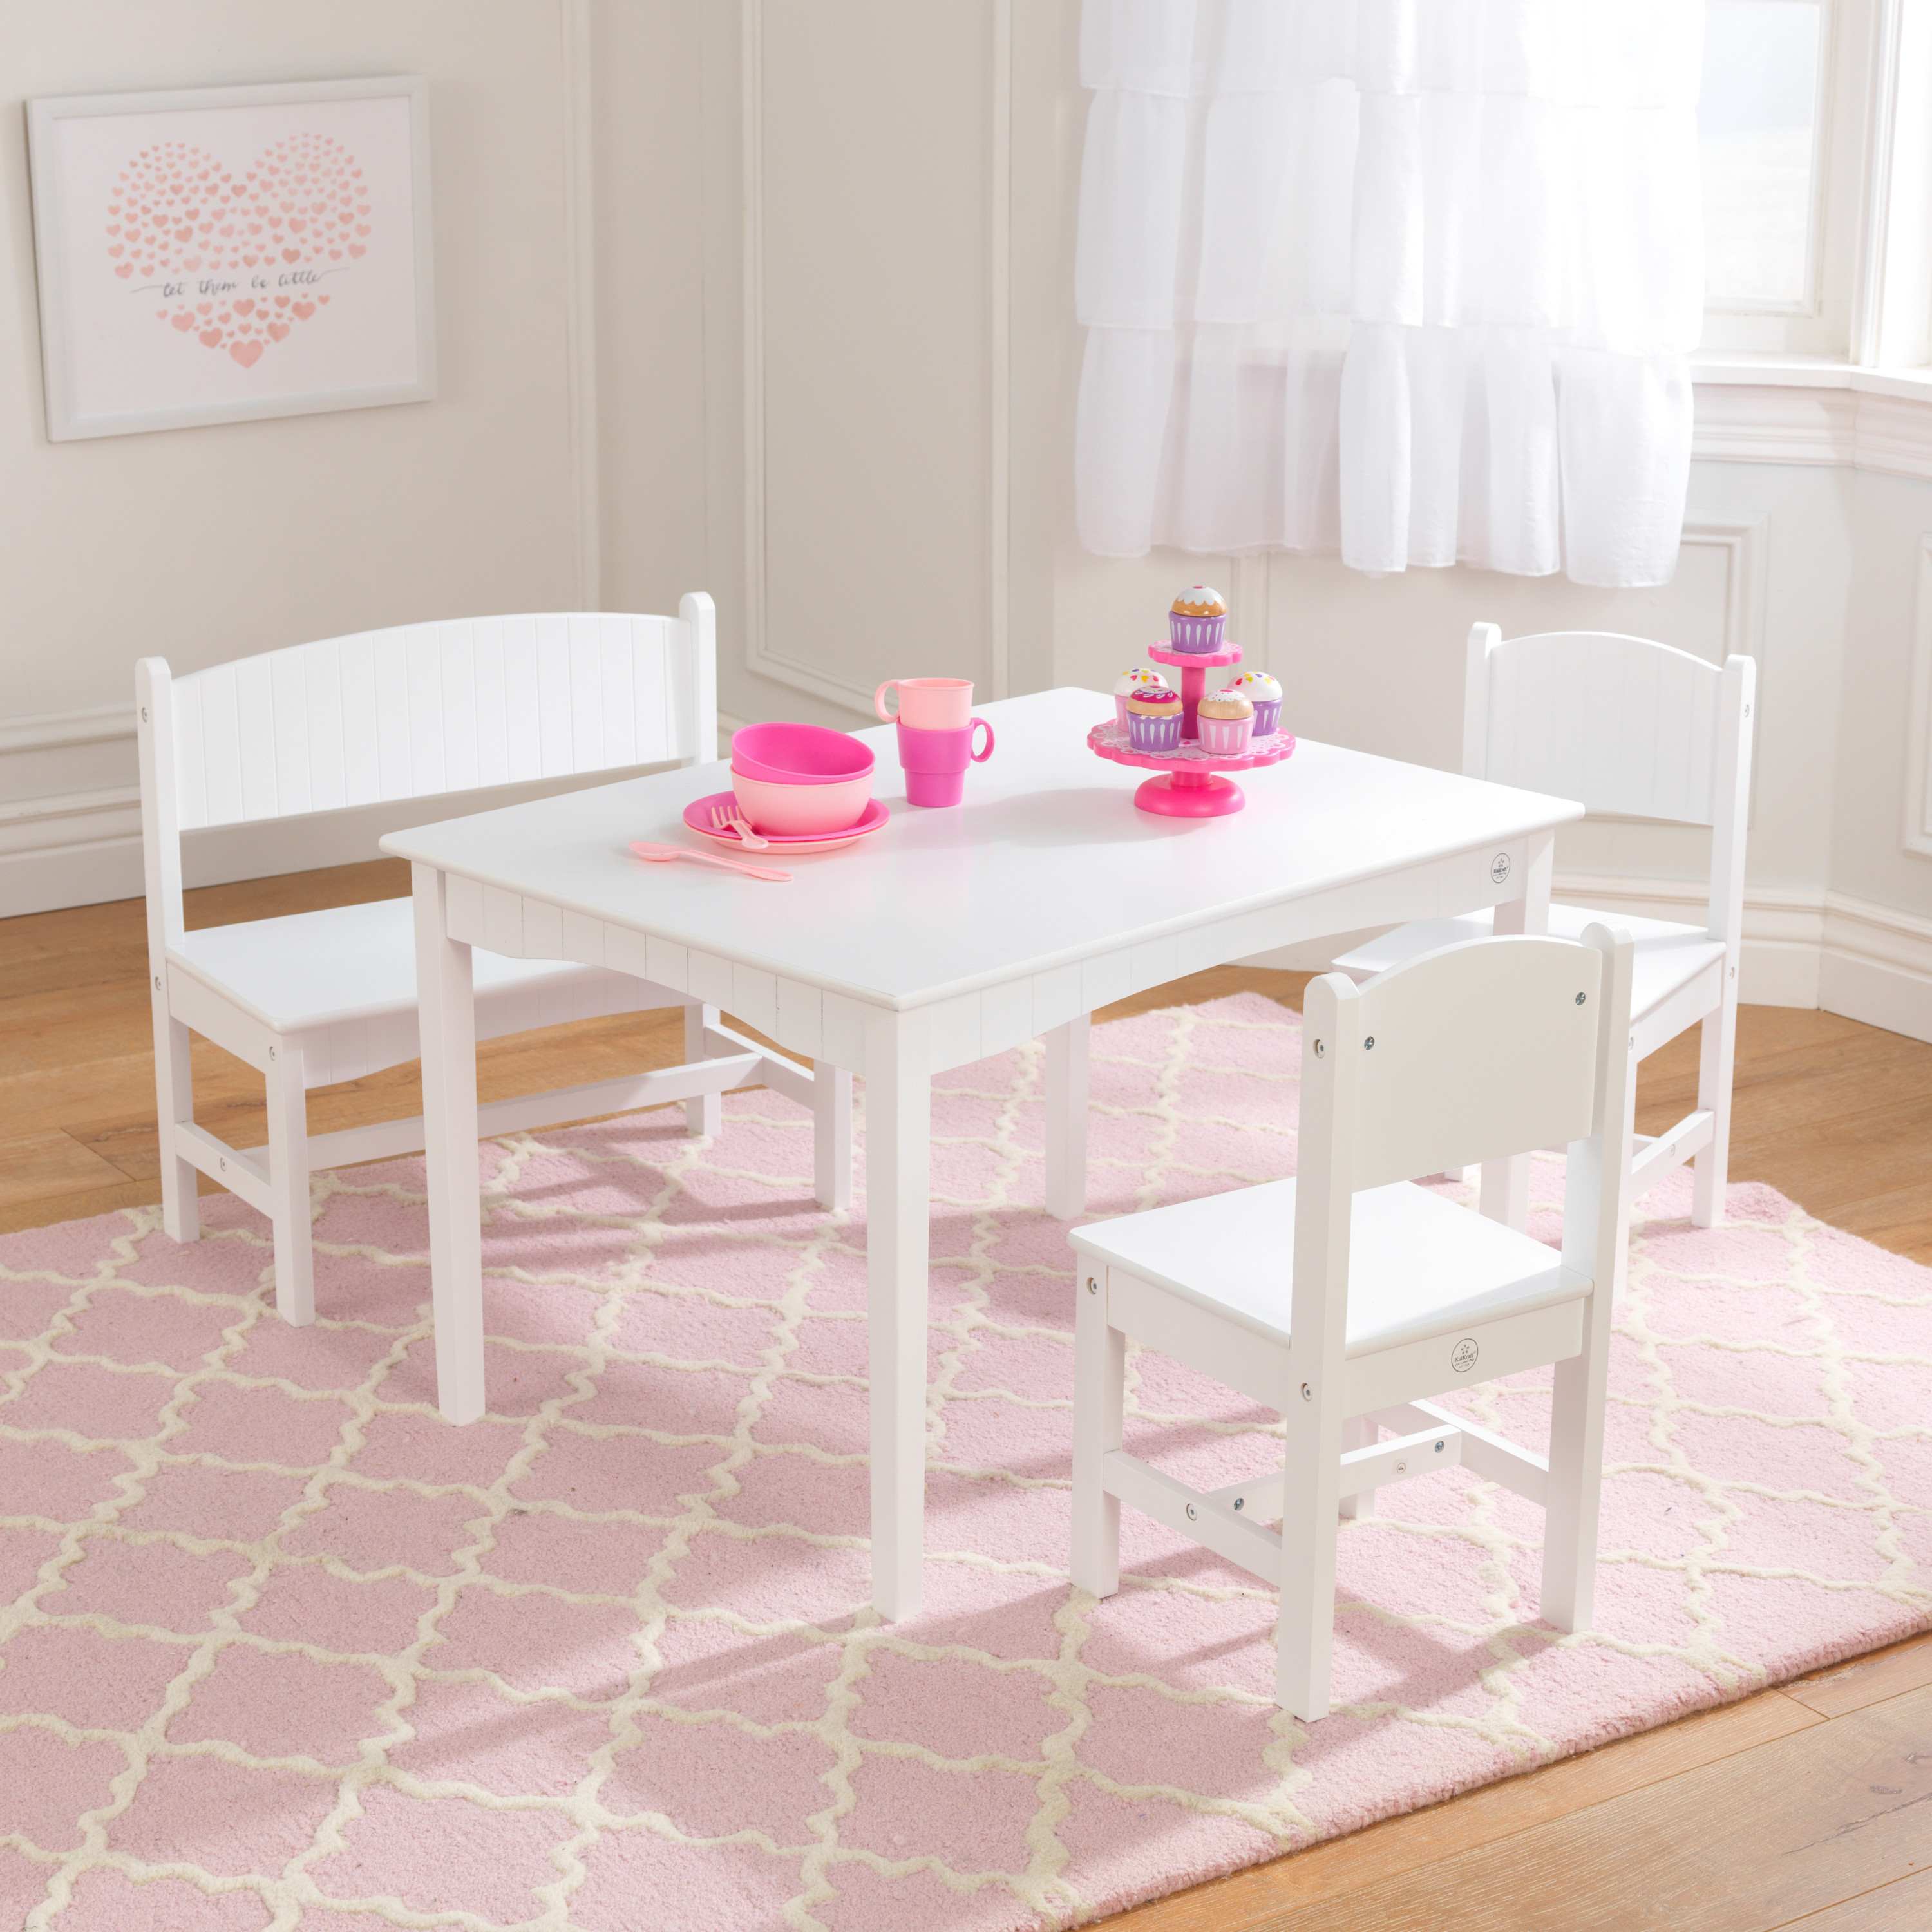 KidKraft Nantucket Wooden Table with Bench and 2 Chairs, Children's Furniture - White - image 3 of 8